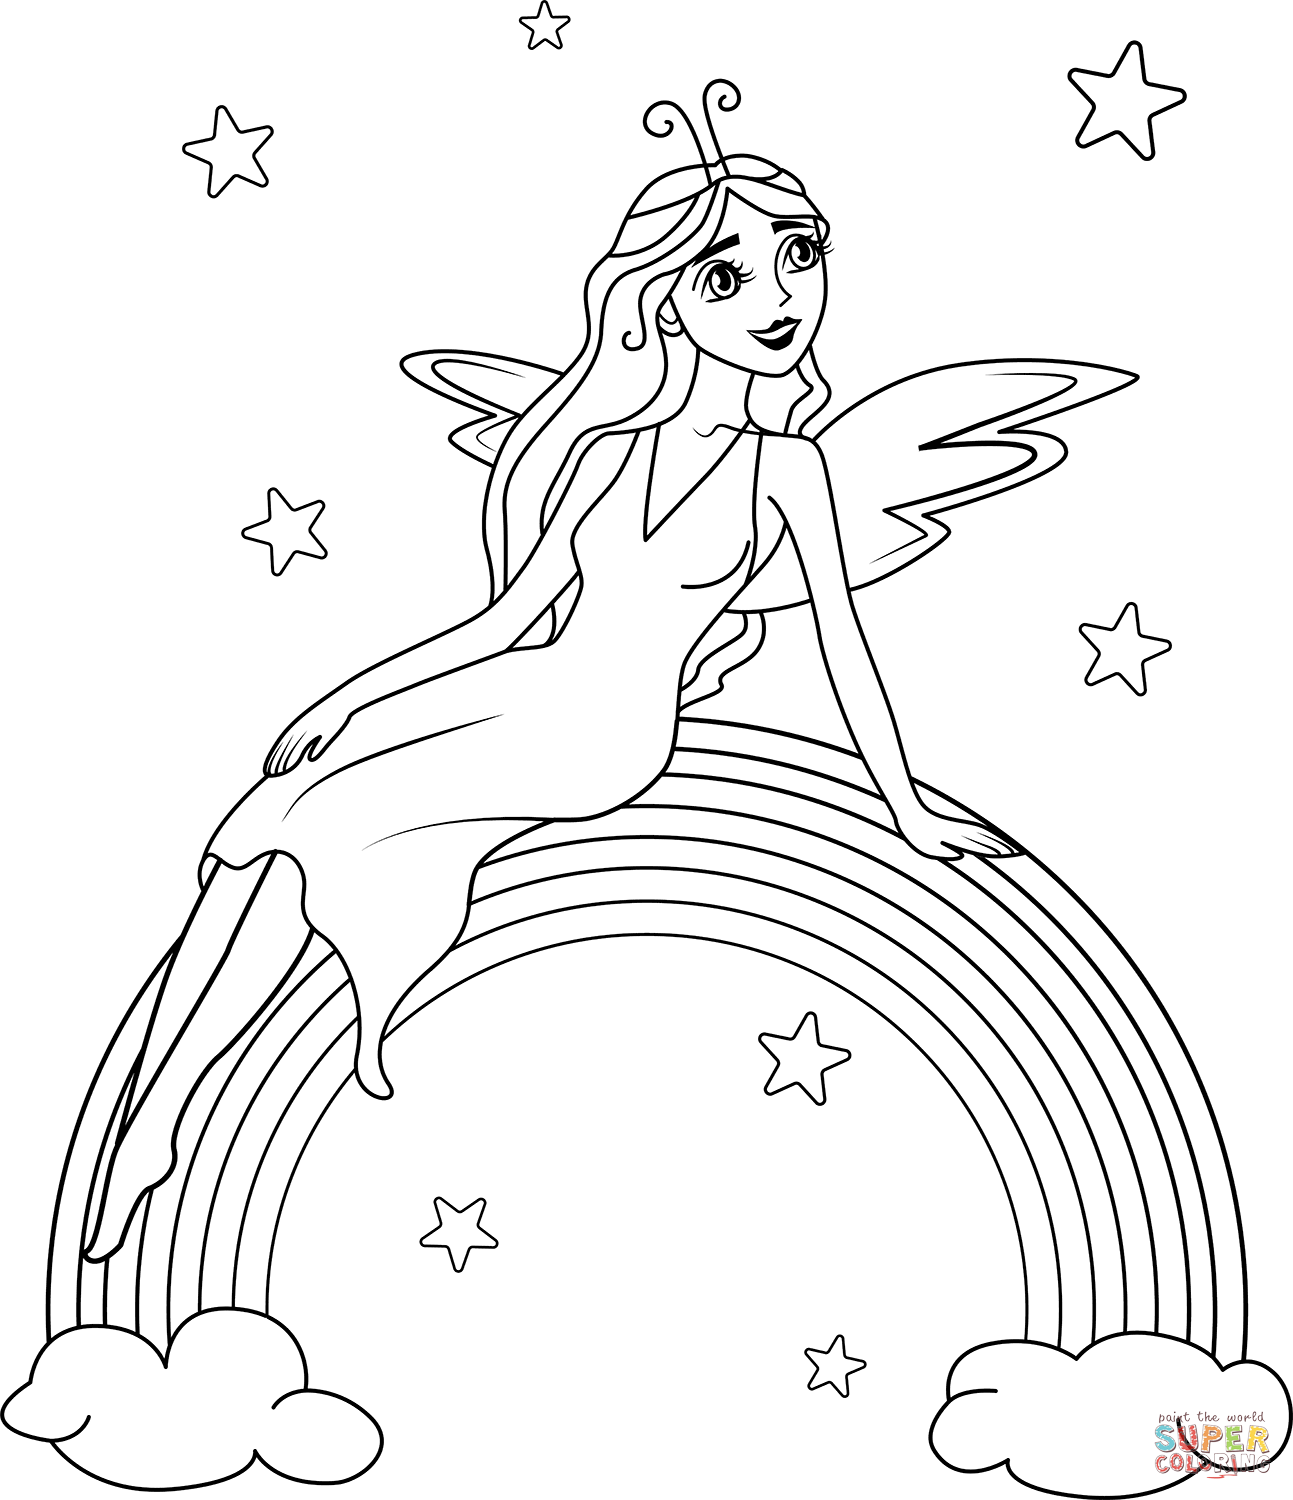 Rainbow Fairy coloring page | Free Printable Coloring Pages